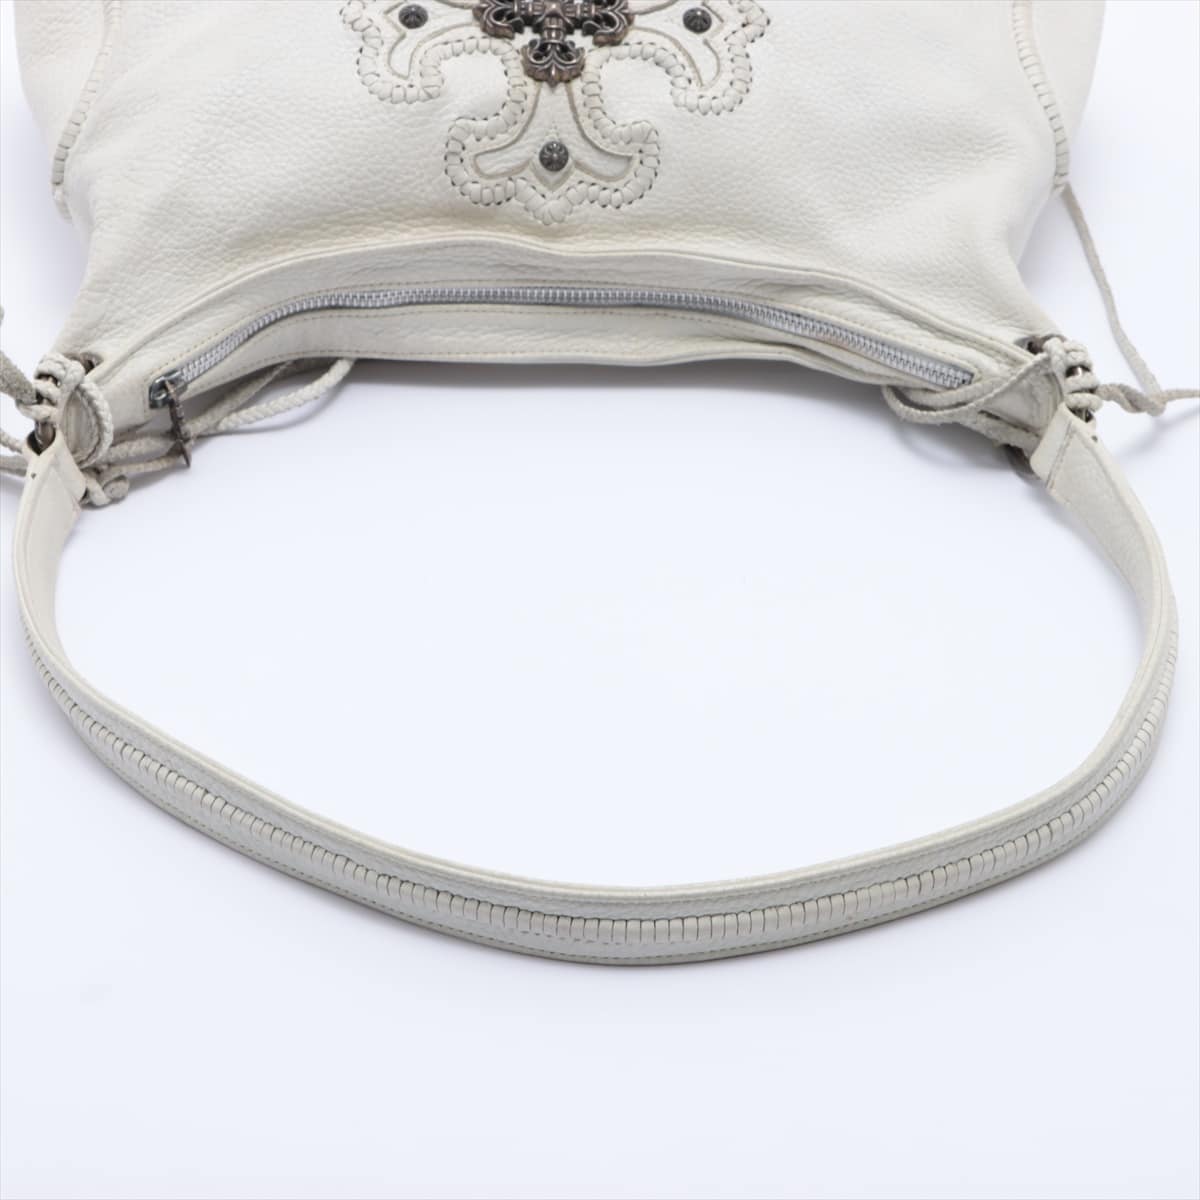 Chrome Hearts Filigree Cross Shoulder bag Leather With invoice White